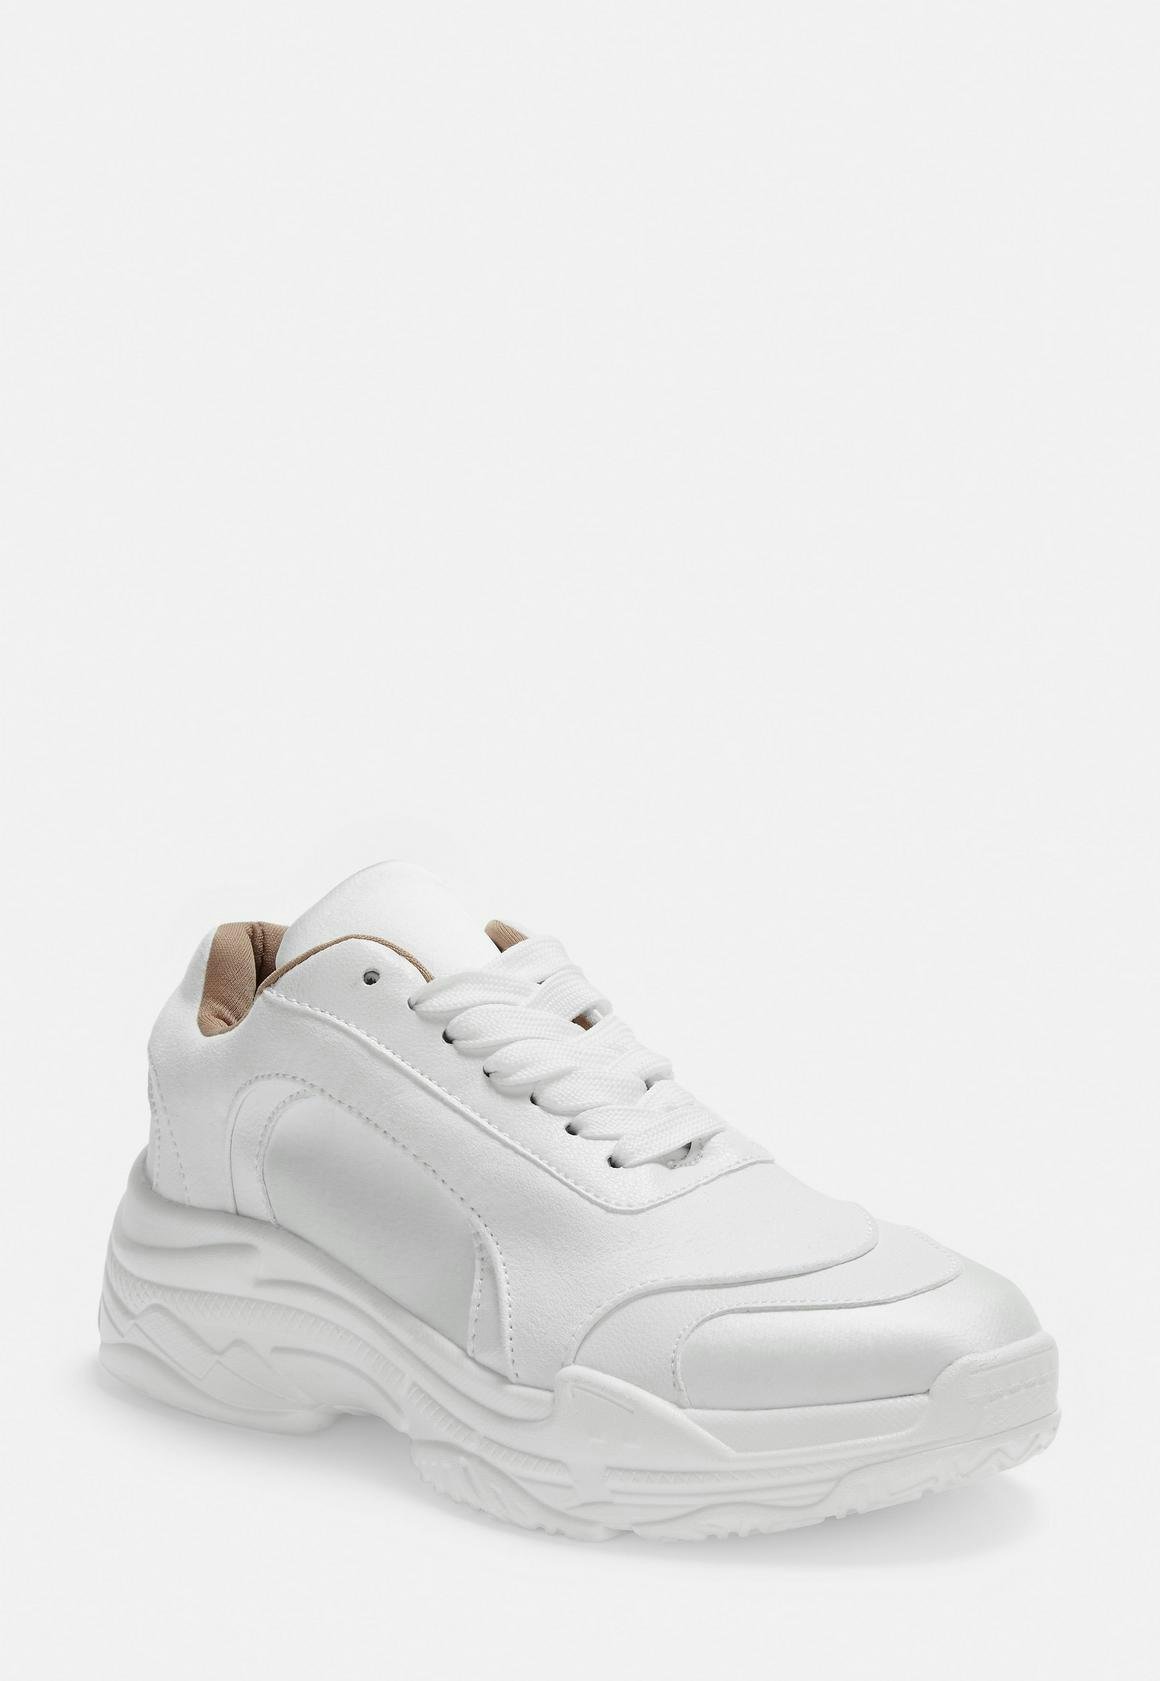 white bulky shoes